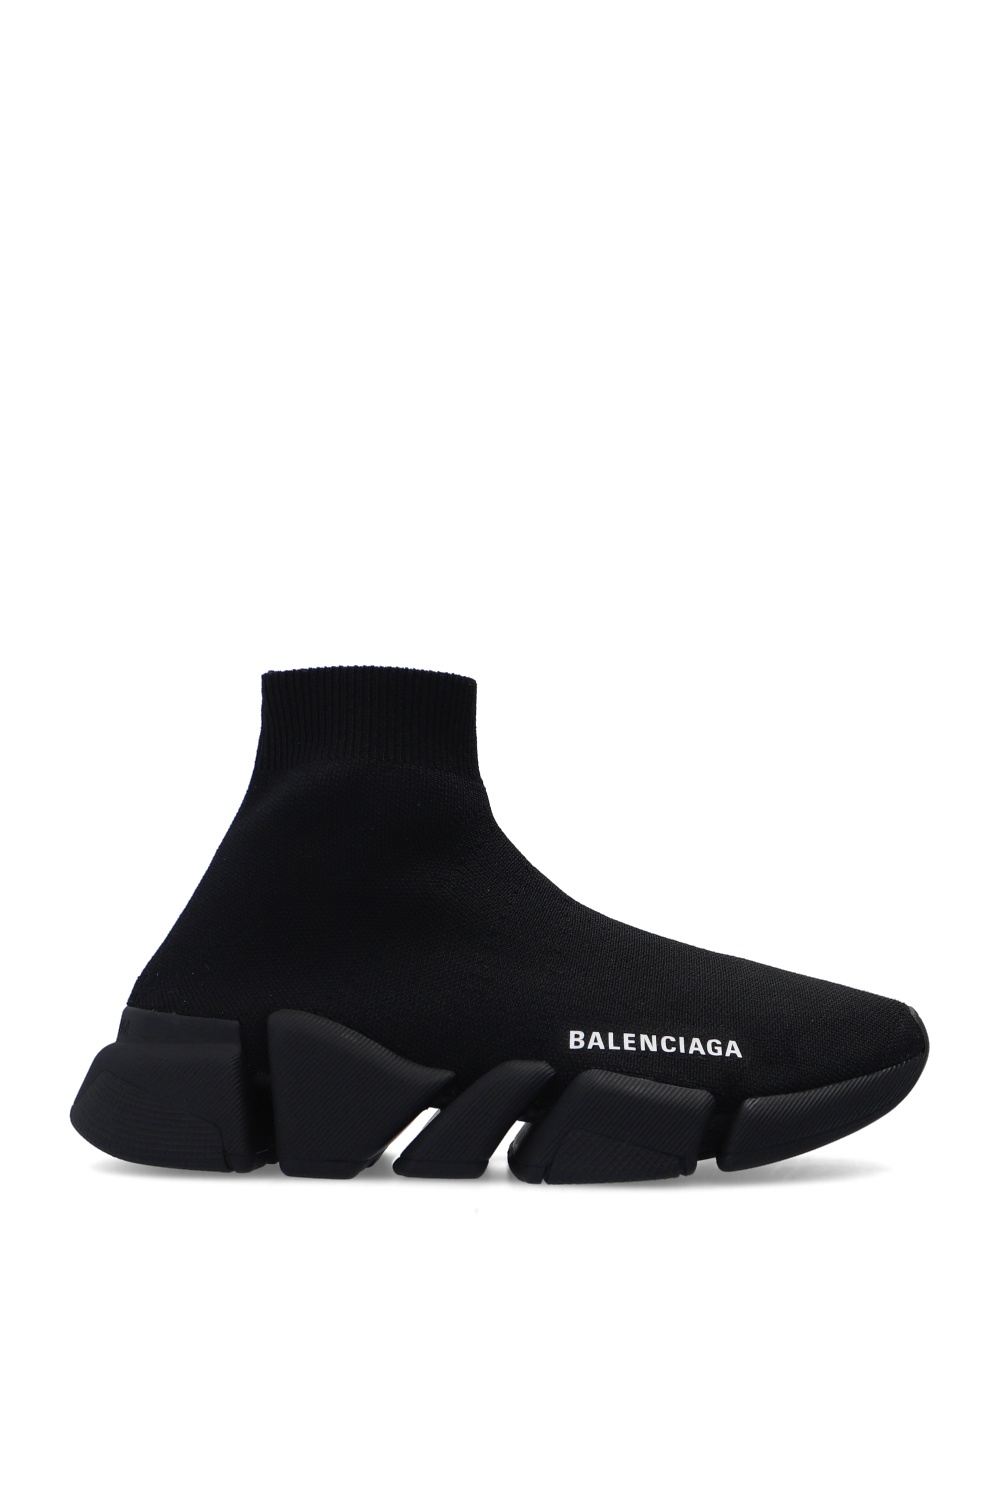 tellen Mok man Balenciaga 'Speed 2.0 LT' sock sneakers | Your sneaker game will always be  fresh with the FILA® F-13V Leather Synthetic | Women's Shoes | IetpShops